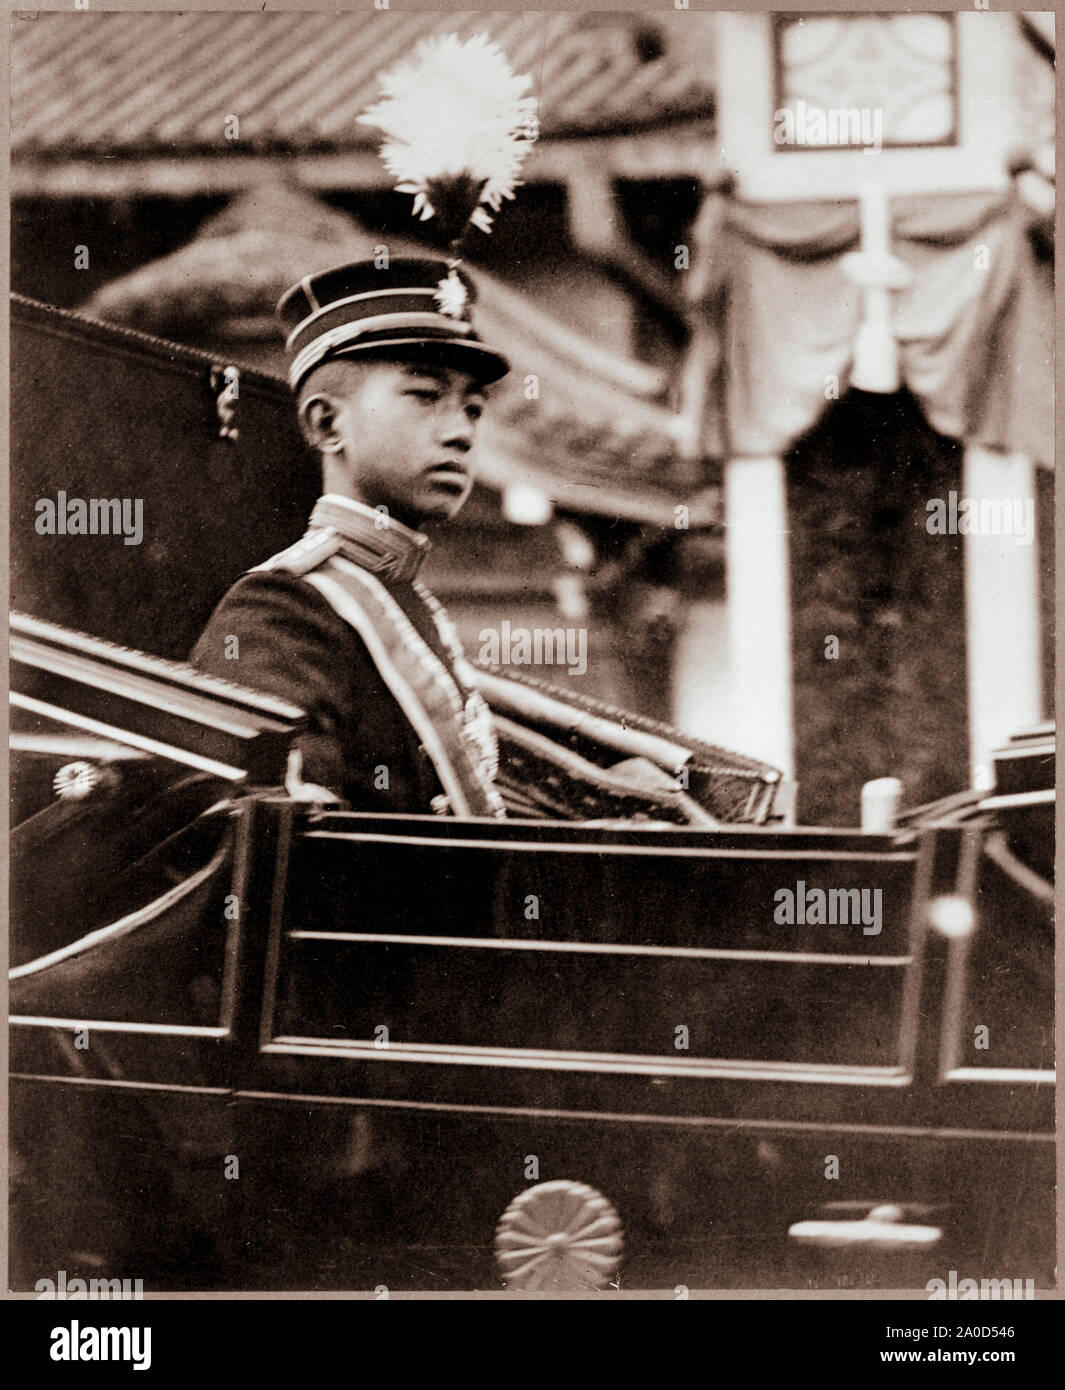 Hirohito, Emperor of Japan, wearing Japanese military uniform, half-length portrait, facing right, seated in carriage with chrysanthemum emblem on the door. Stock Photo